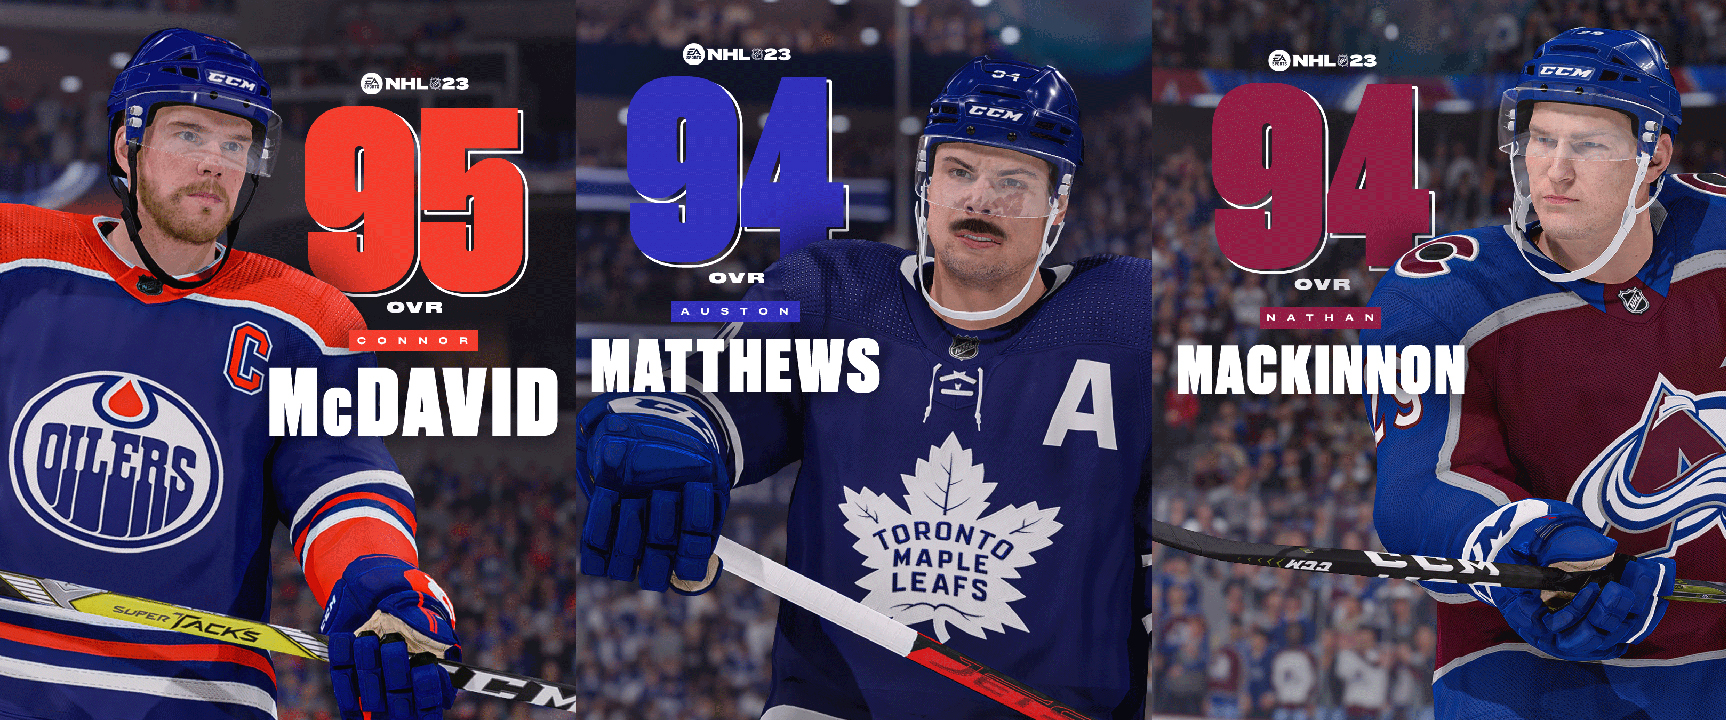 Ranking the NHL's top 50 players for the 2022-23 season from